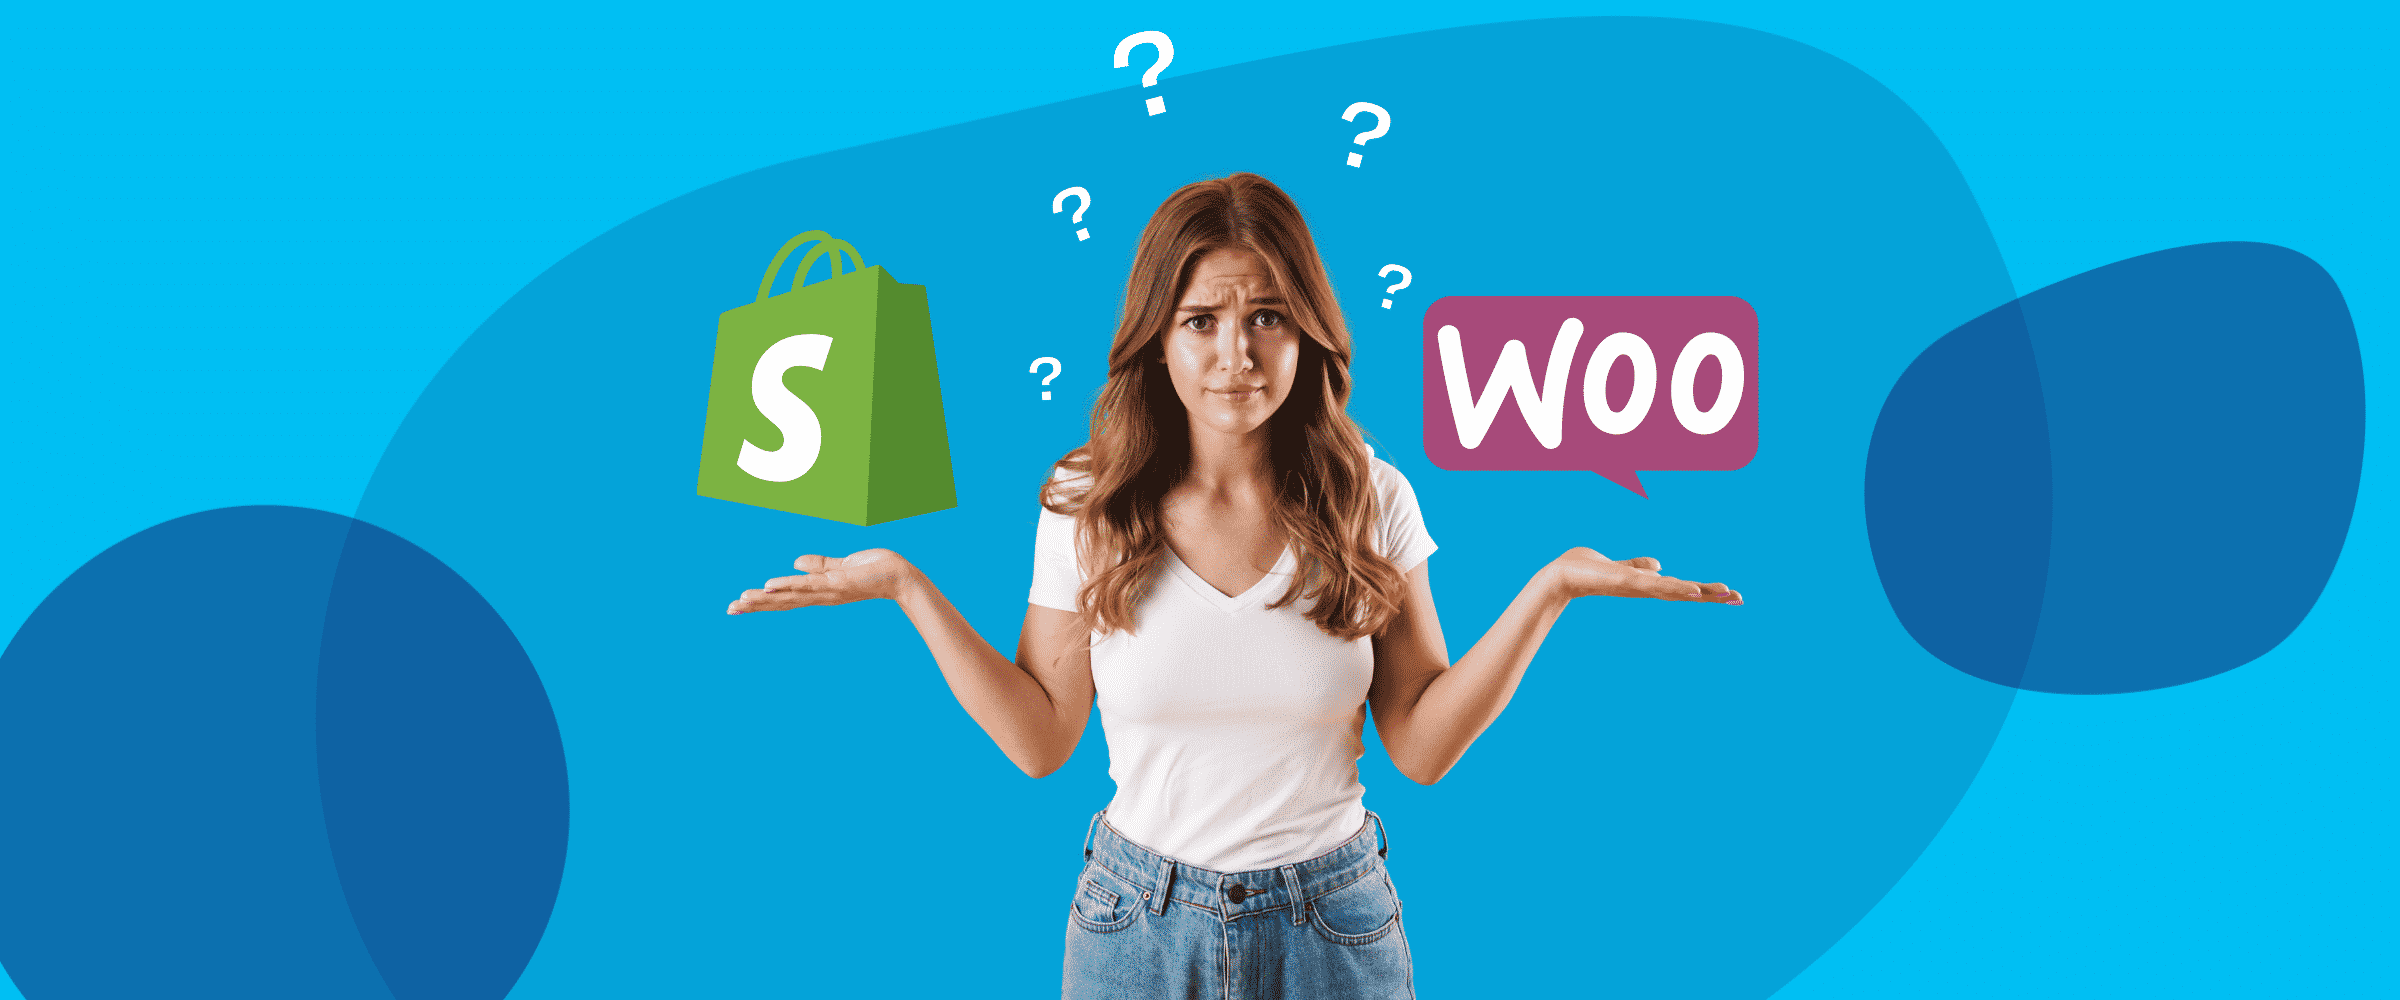 Shopify vs. WooCommerce Which is better for eCommerce